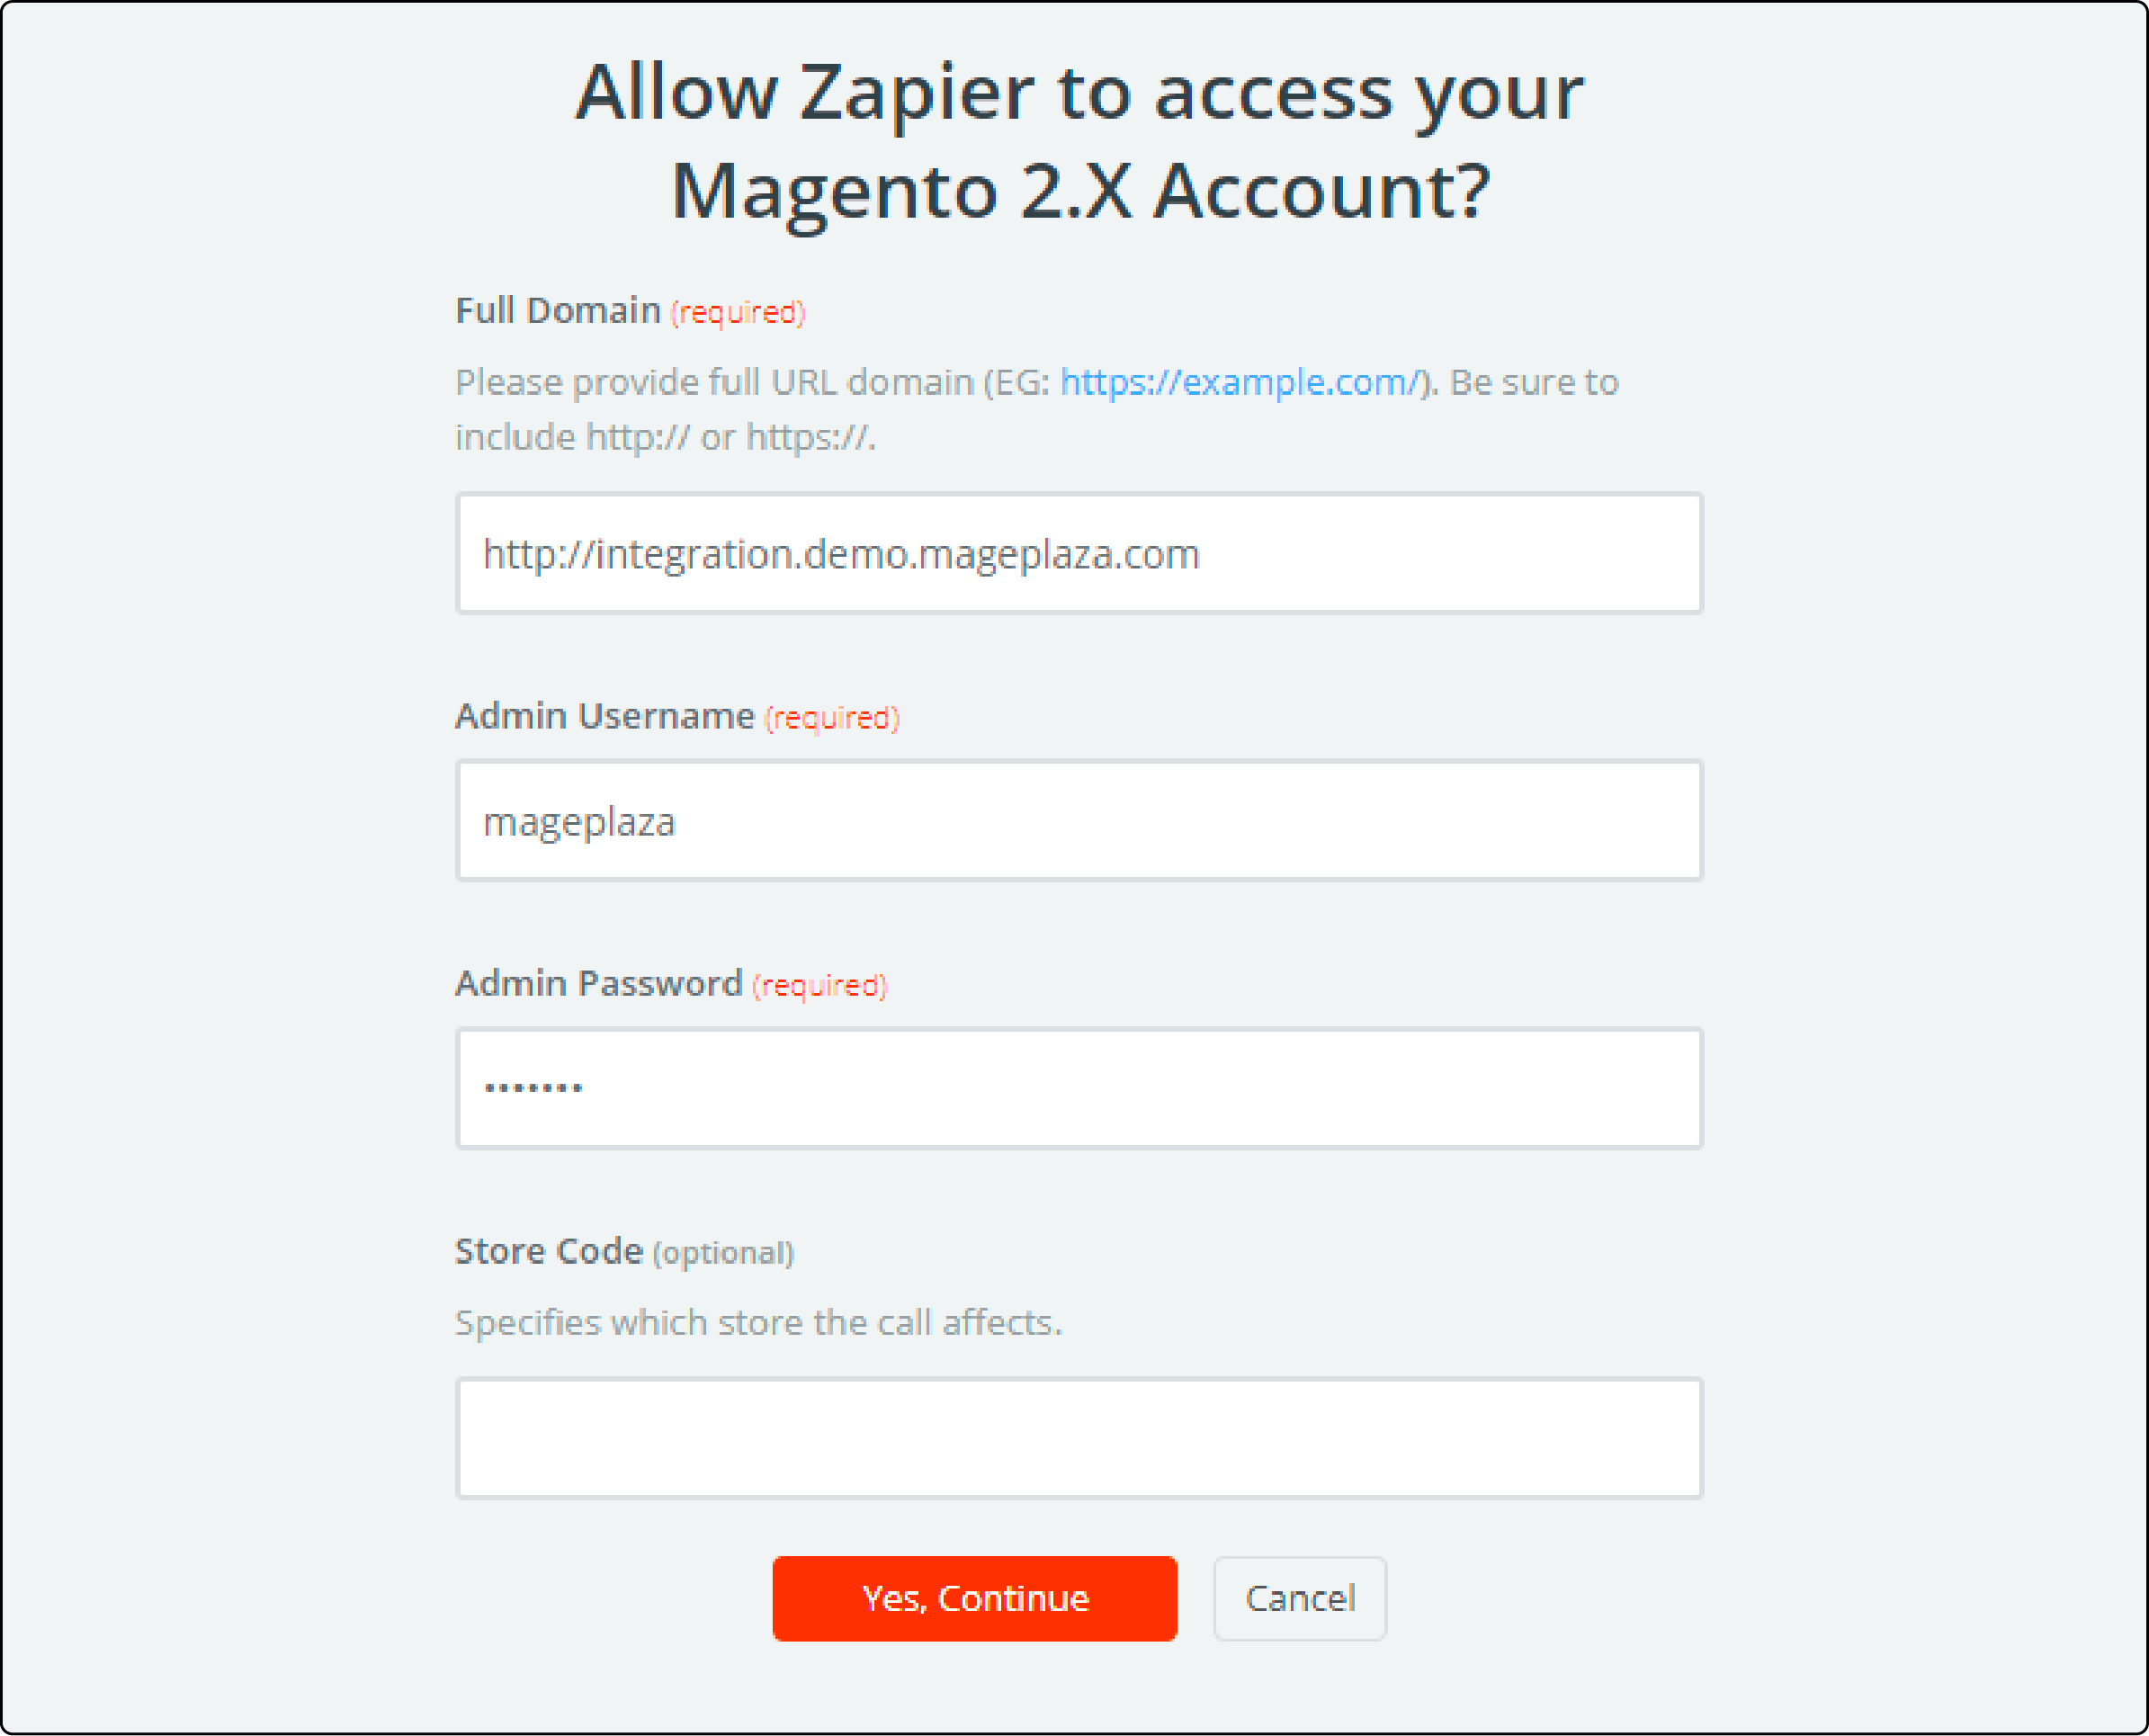 Connecting Magento 2.x account to Zapier for CRM integration